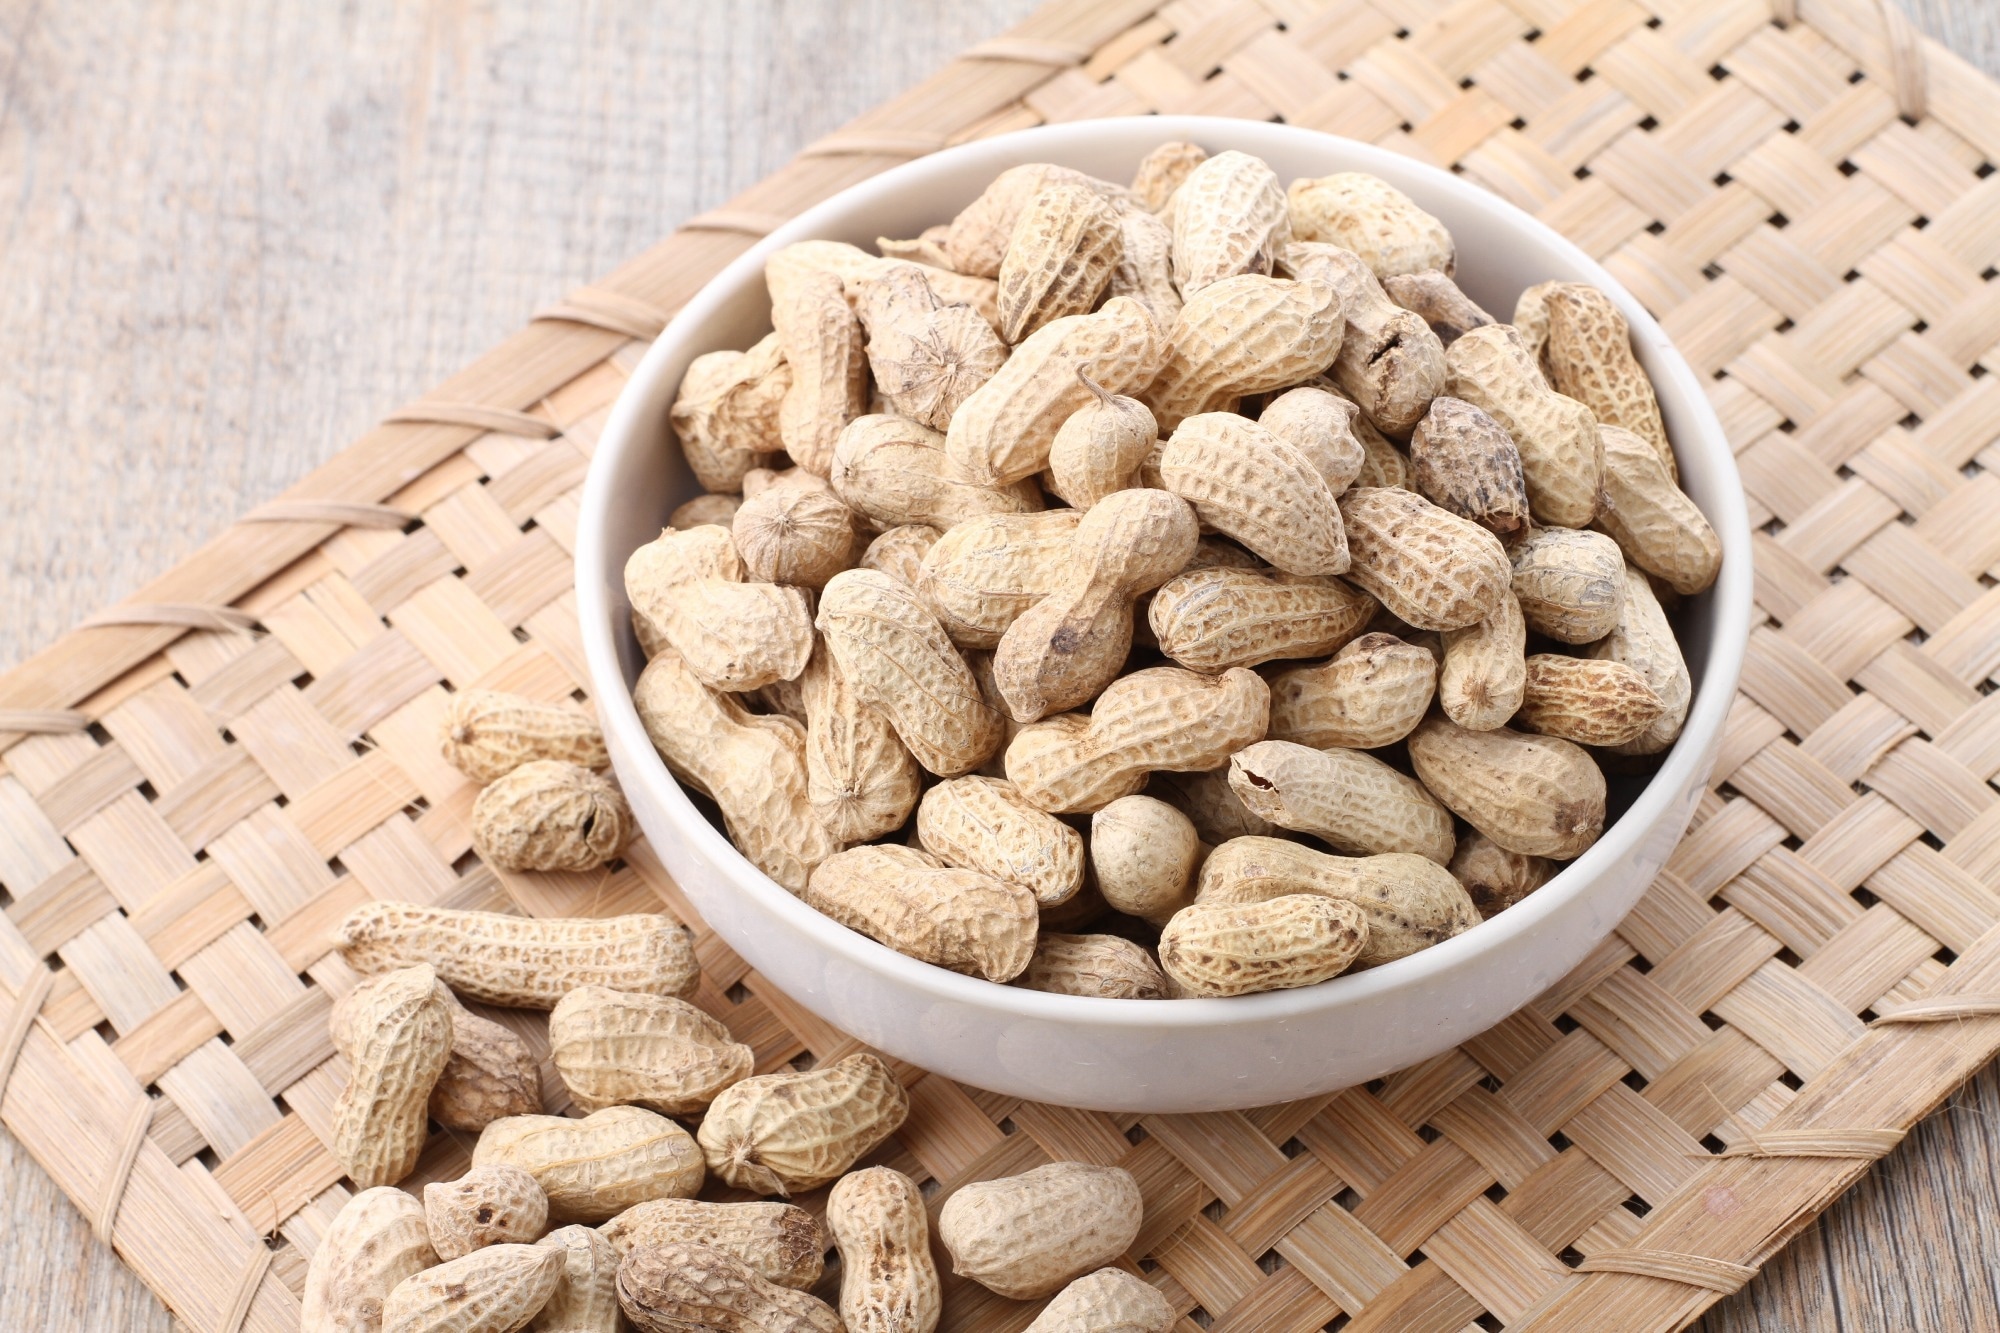 Does maternal peanut consumption protect against infant peanut allergies?